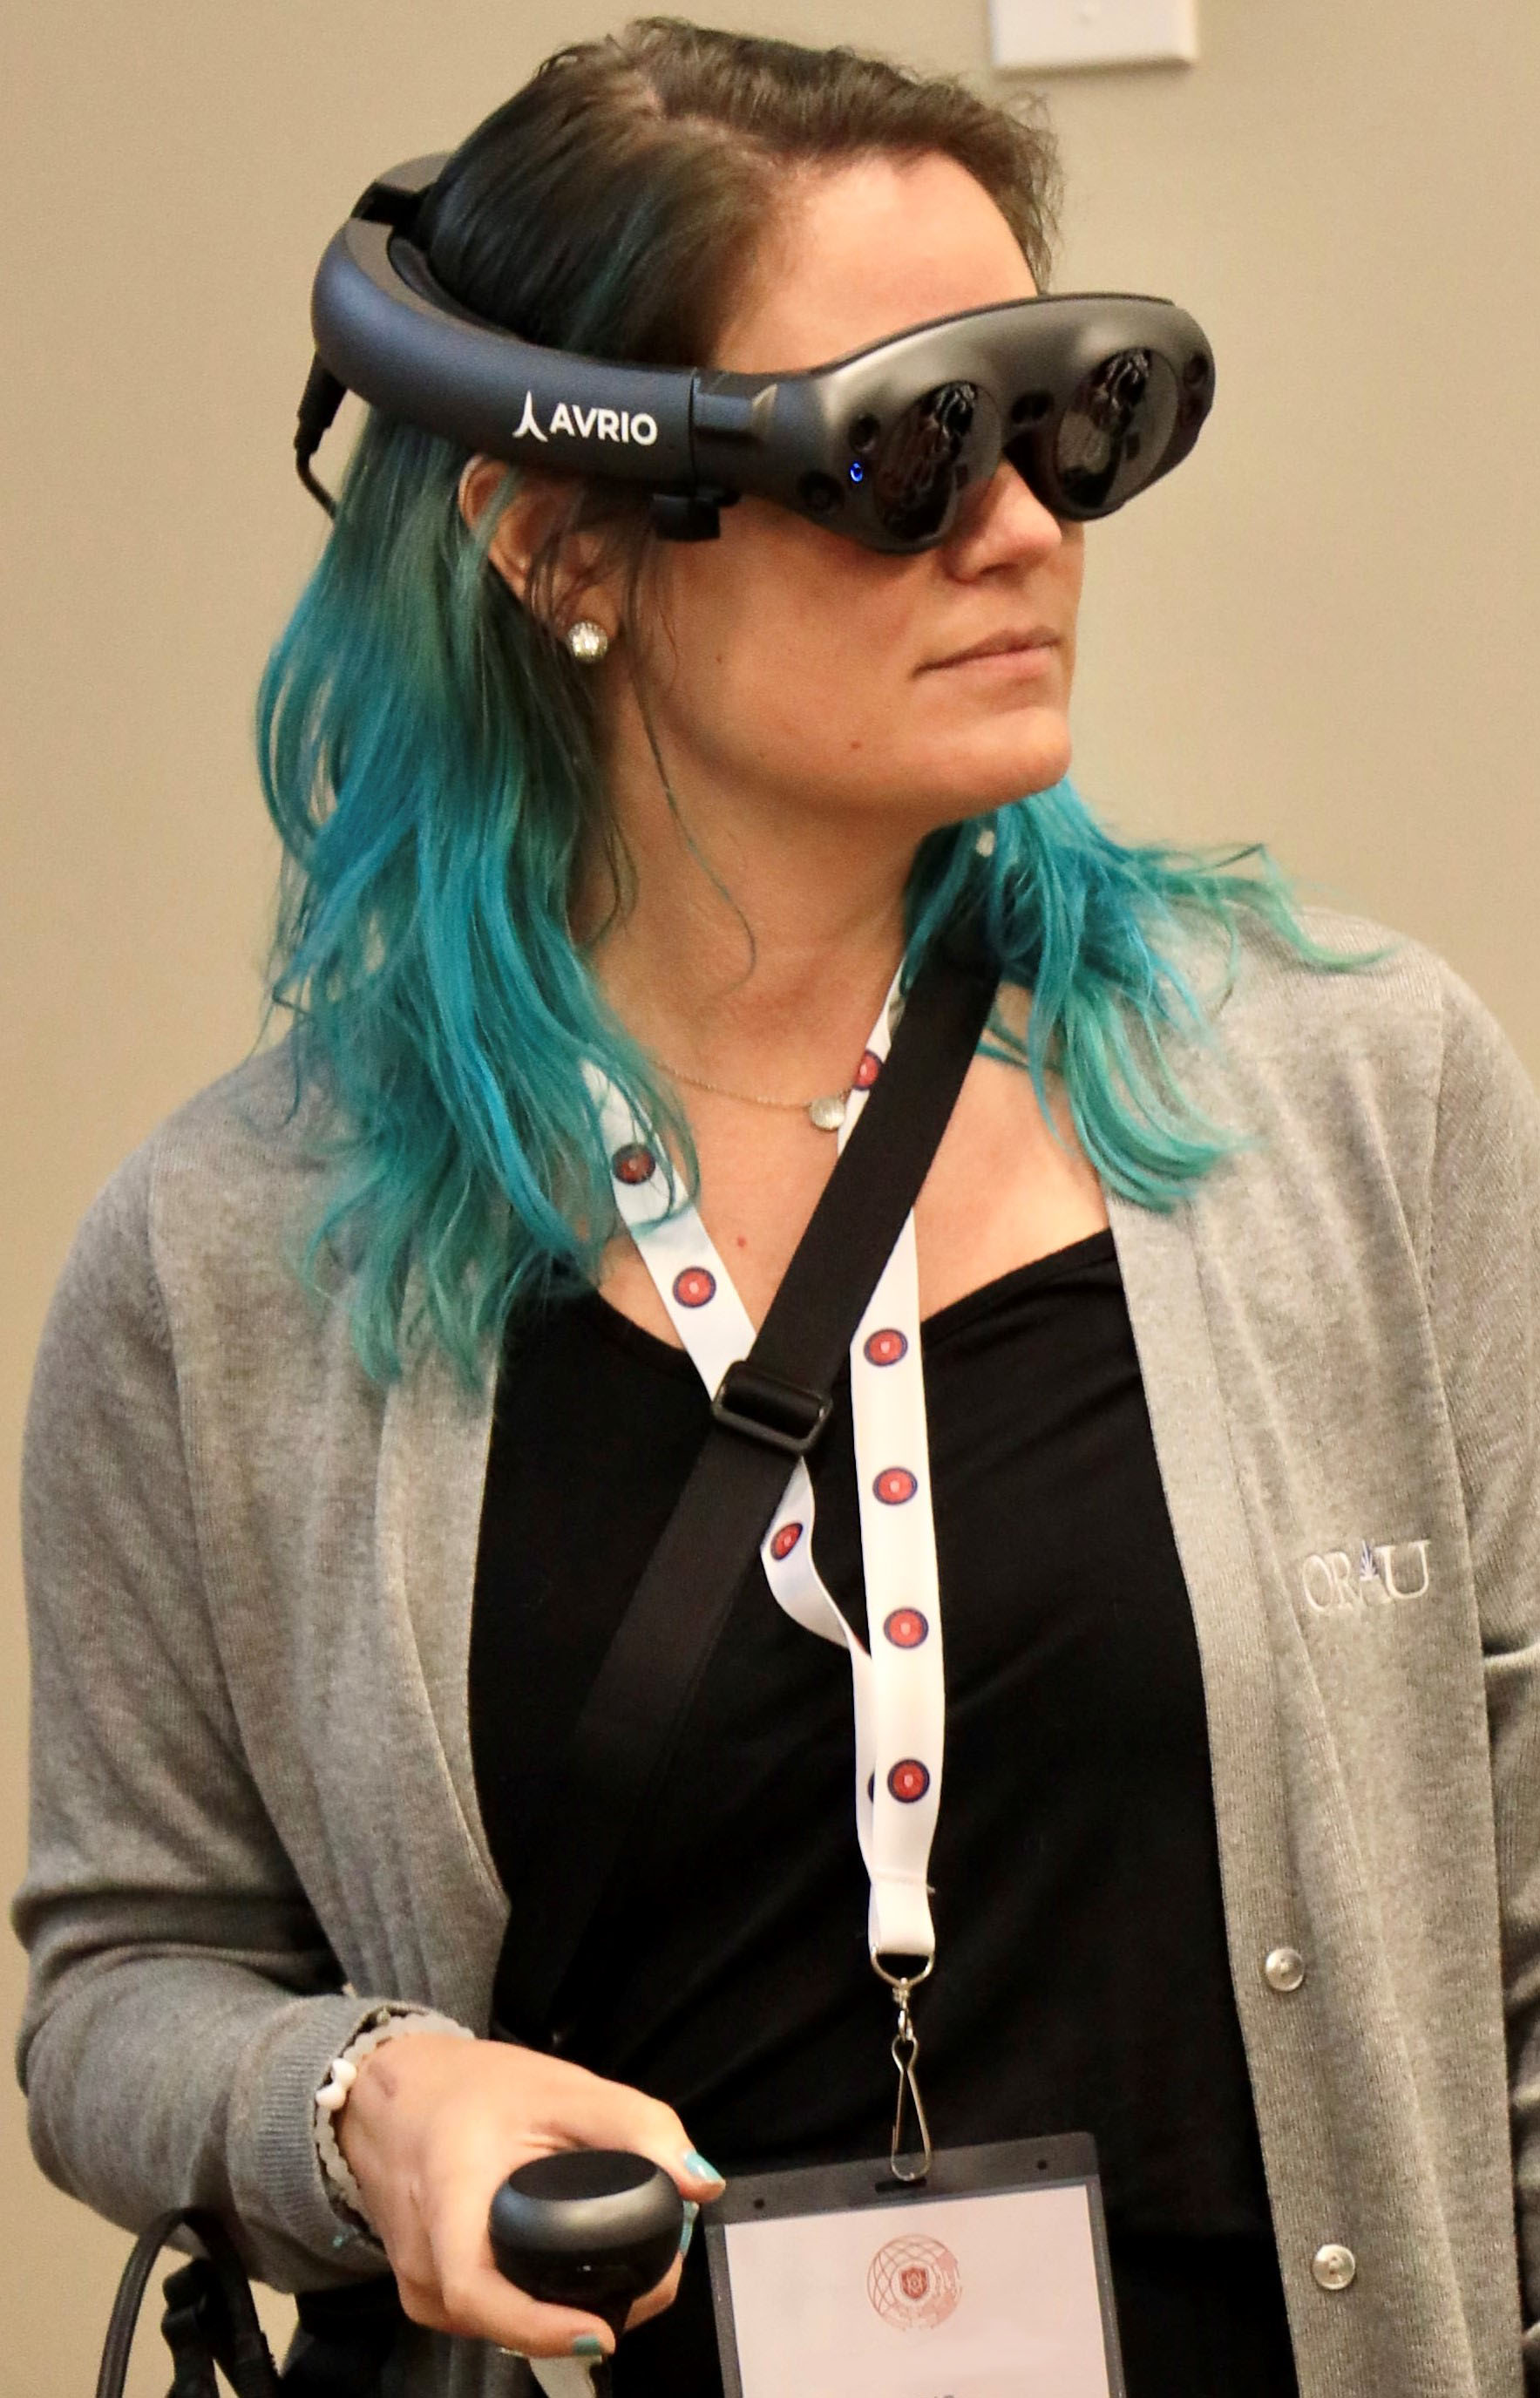 An XR Symposium attendee tries out an AR headset.